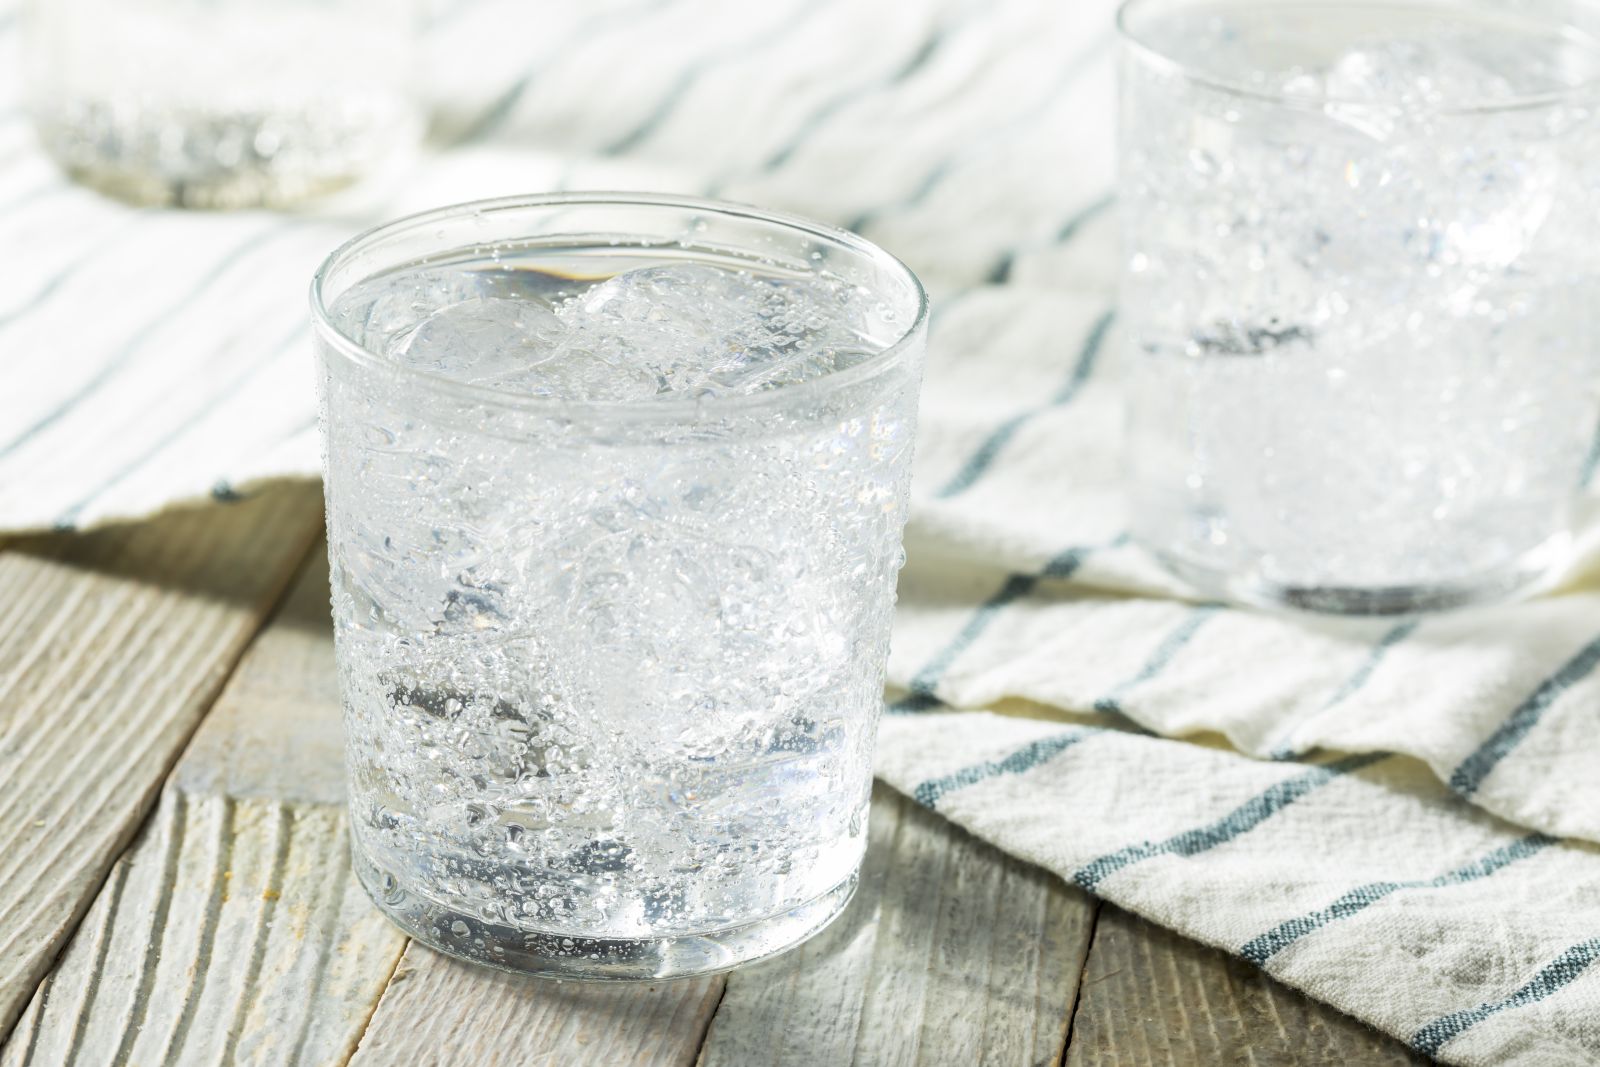 By the way, doctor: Does carbonated water harm bones? - Harvard Health